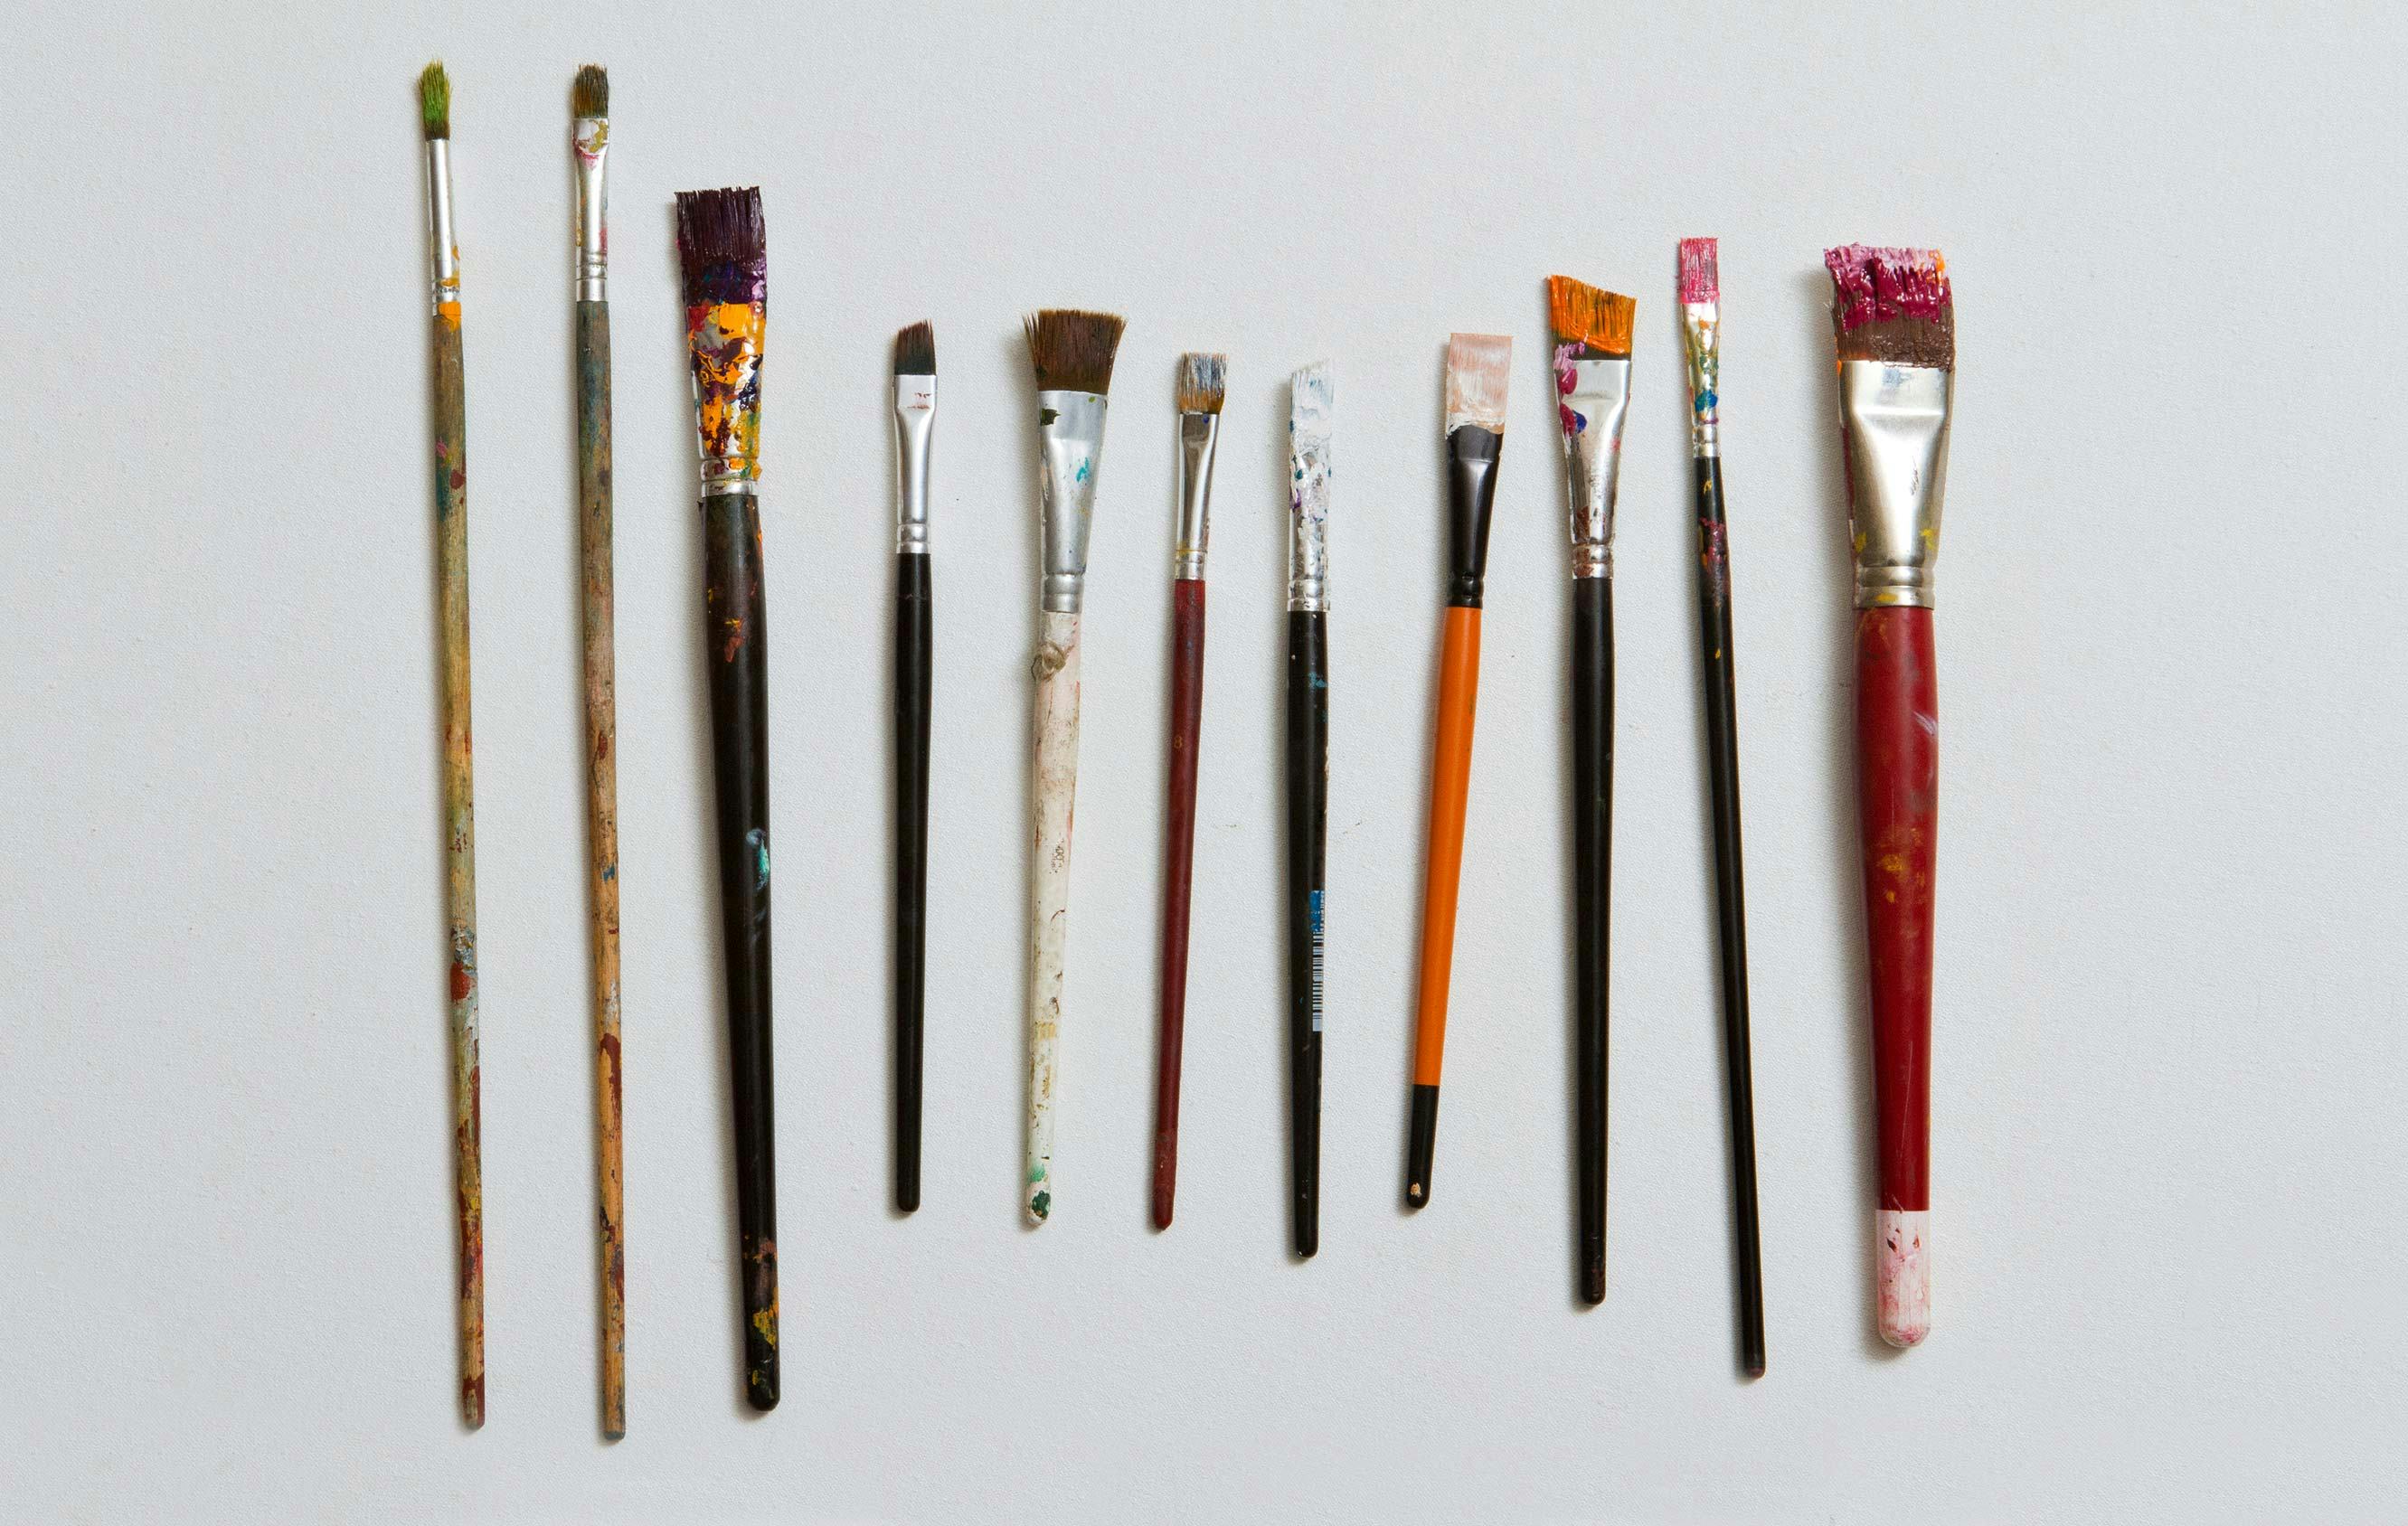 Different sized and shaped paint brushes side by side